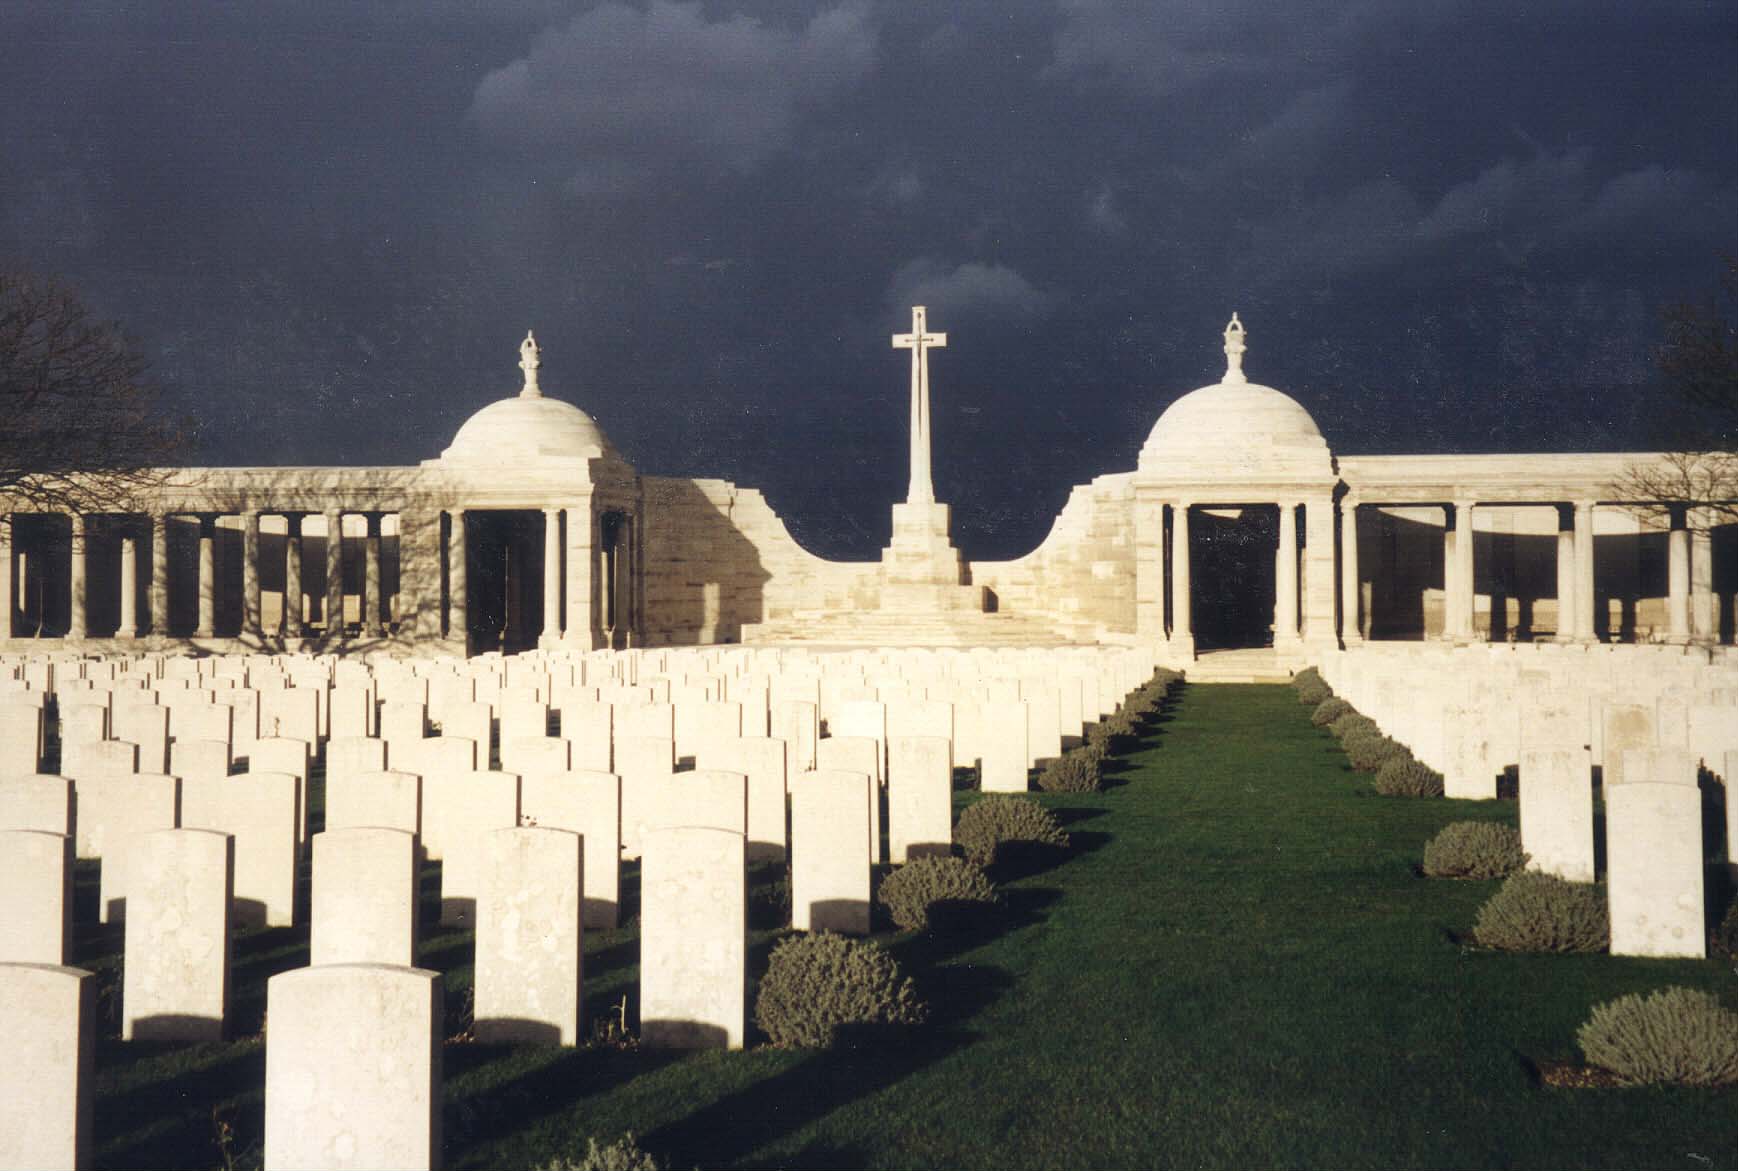 The Loos Memorial with gravestones in rows in the front